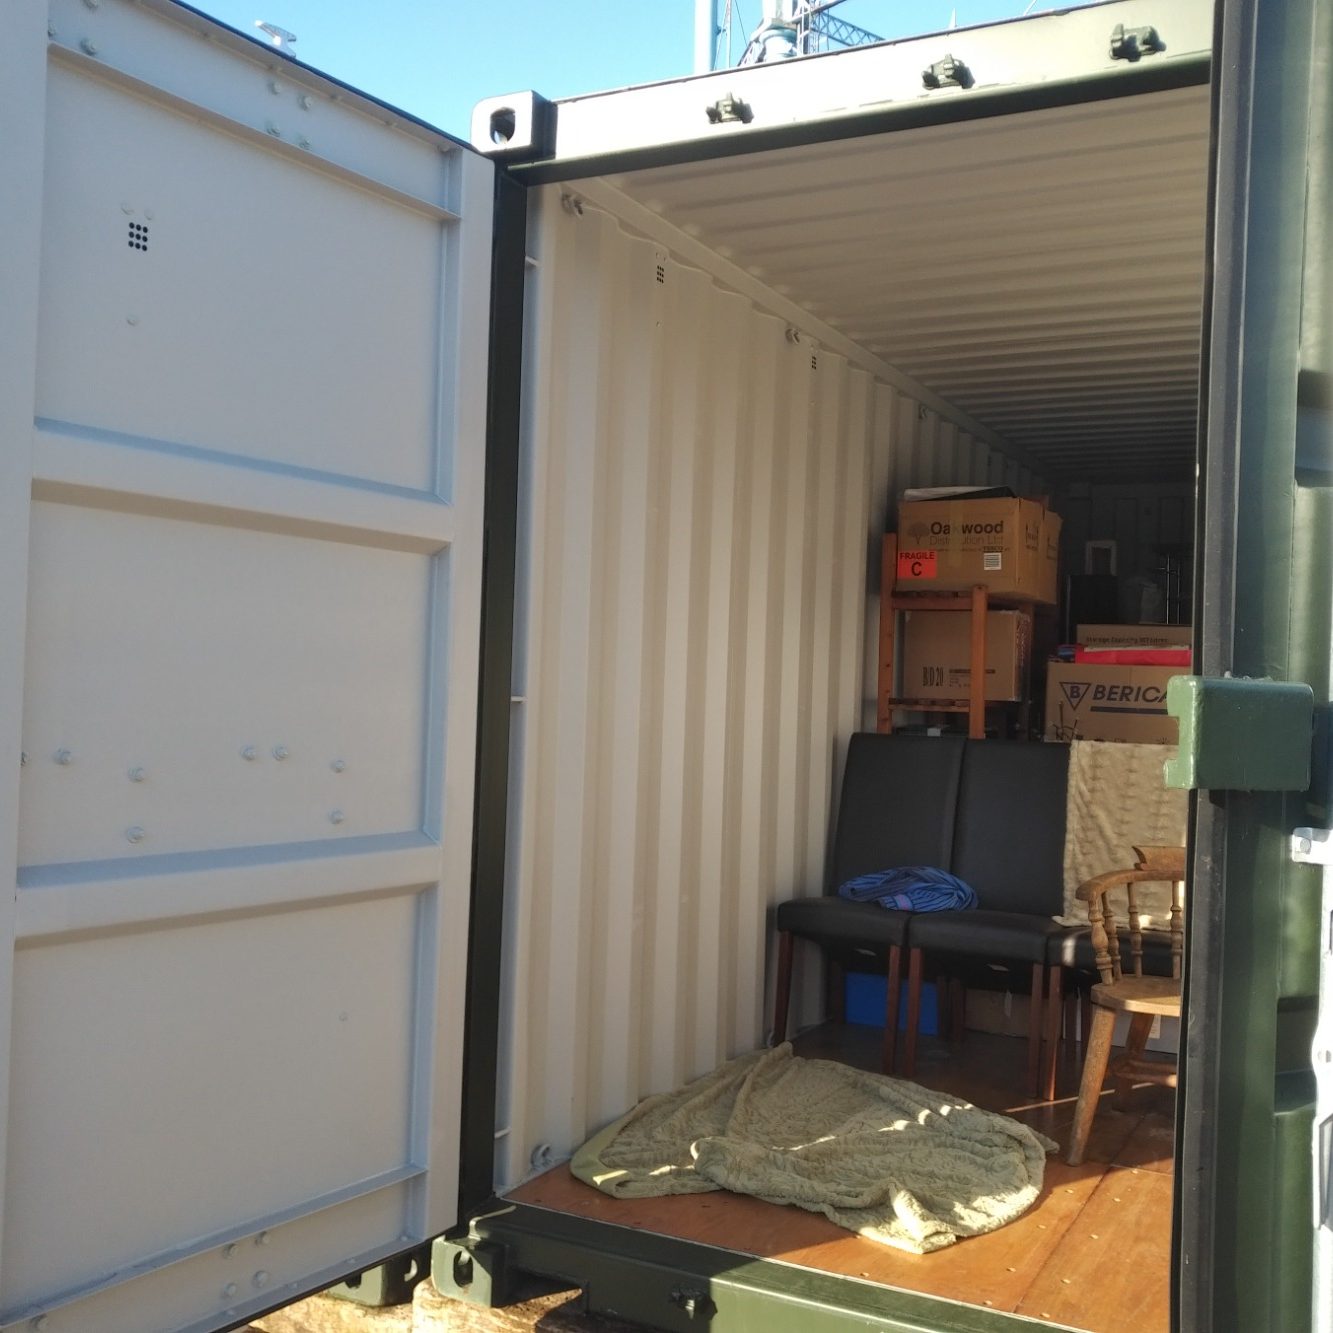 a shipping container with door open showing boxes and furniture